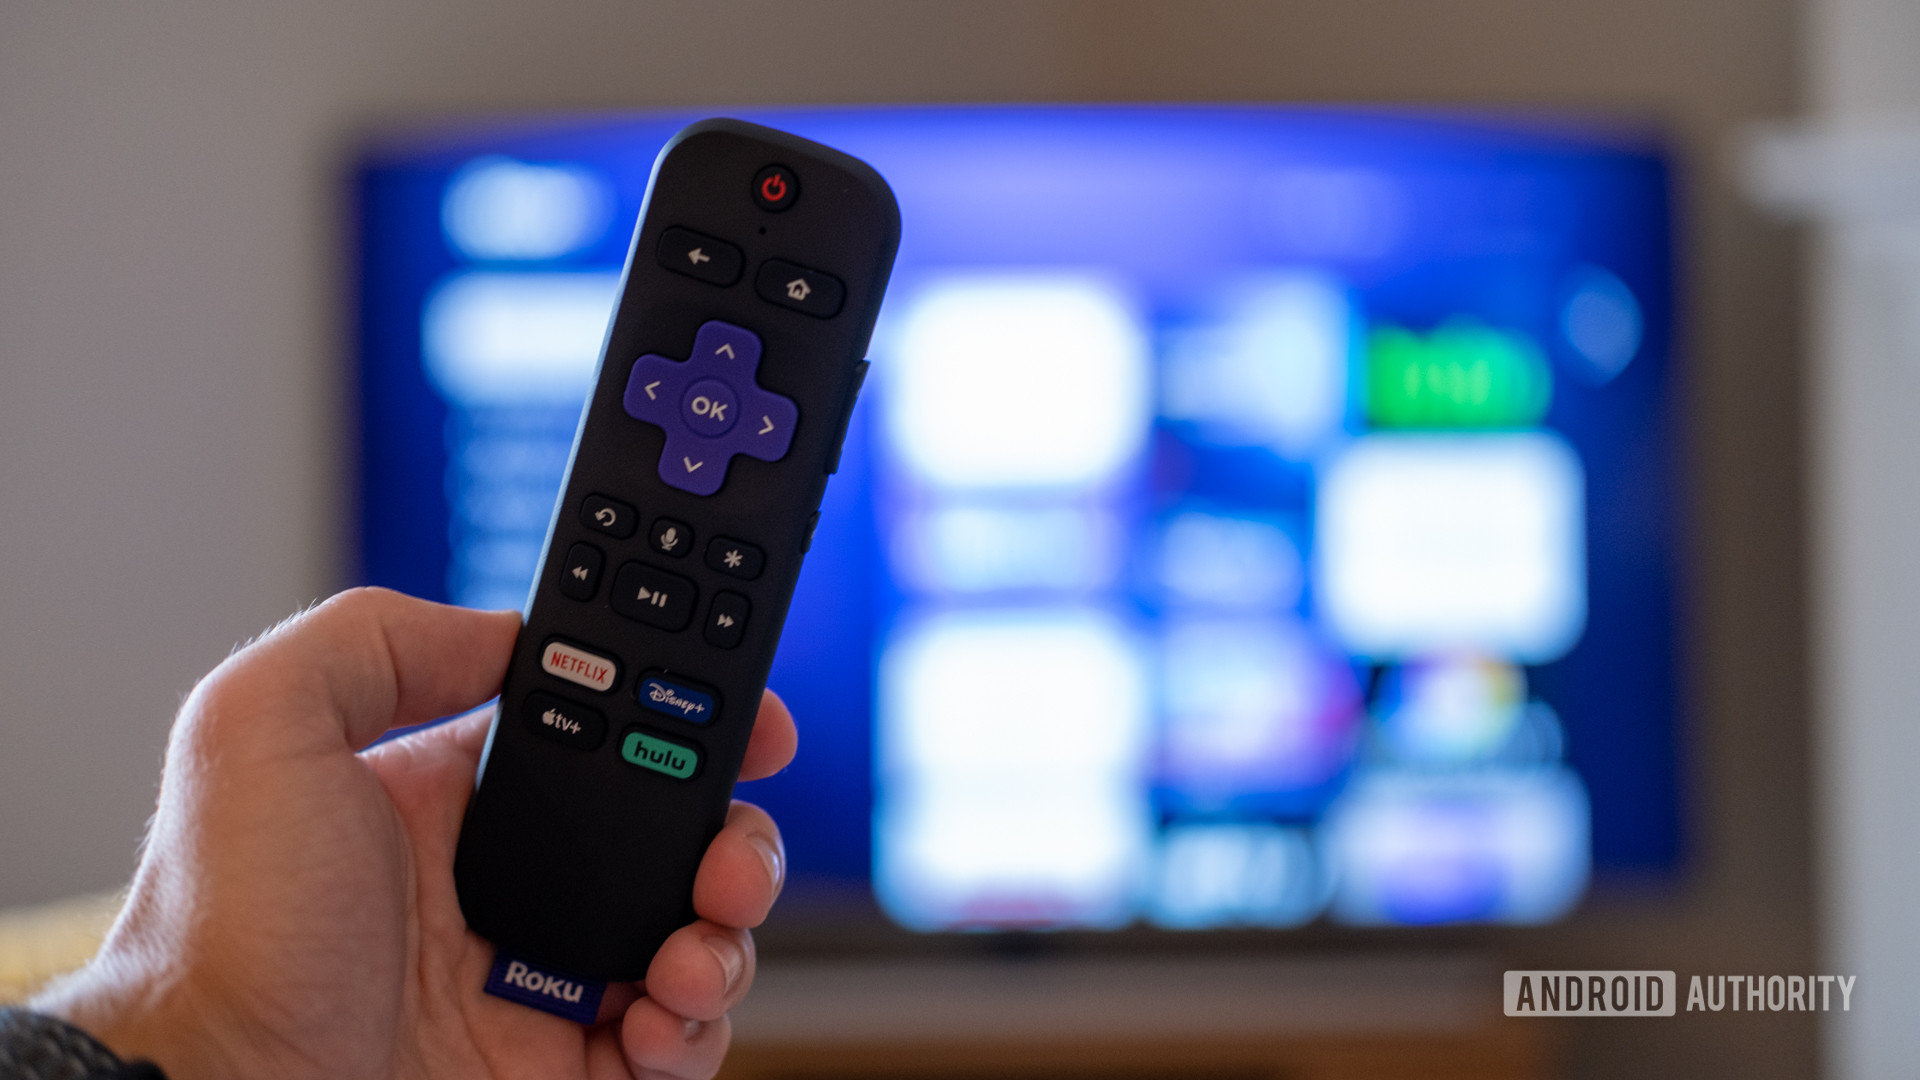 What Is Roku TV and How Does It Work?